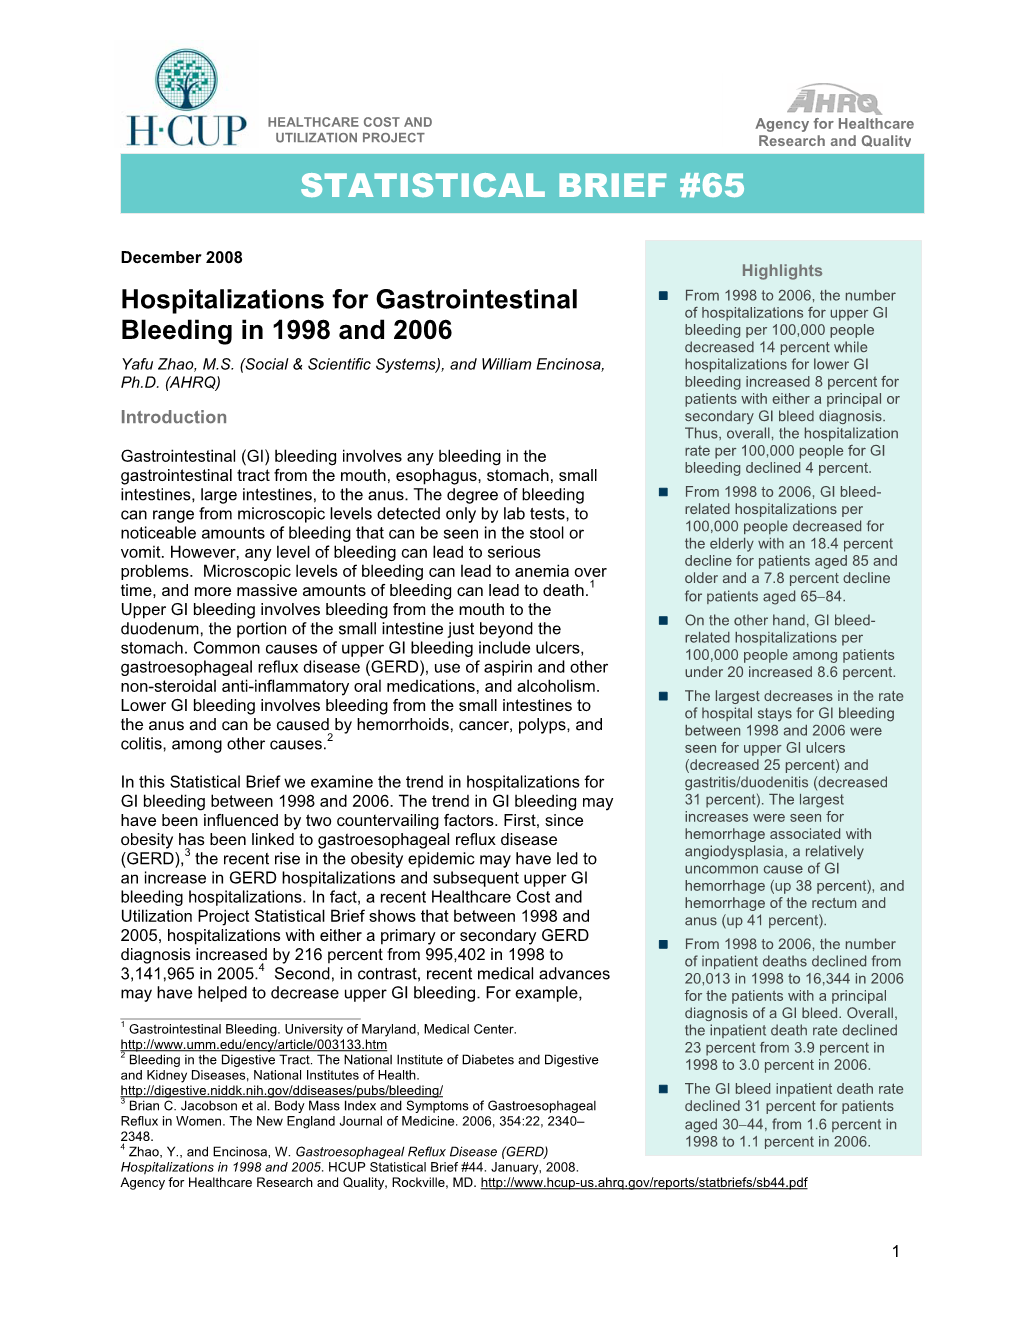 Statistical Brief #65: Hospitalizations for Gastrointestinal Bleeding in 1998 and 2006